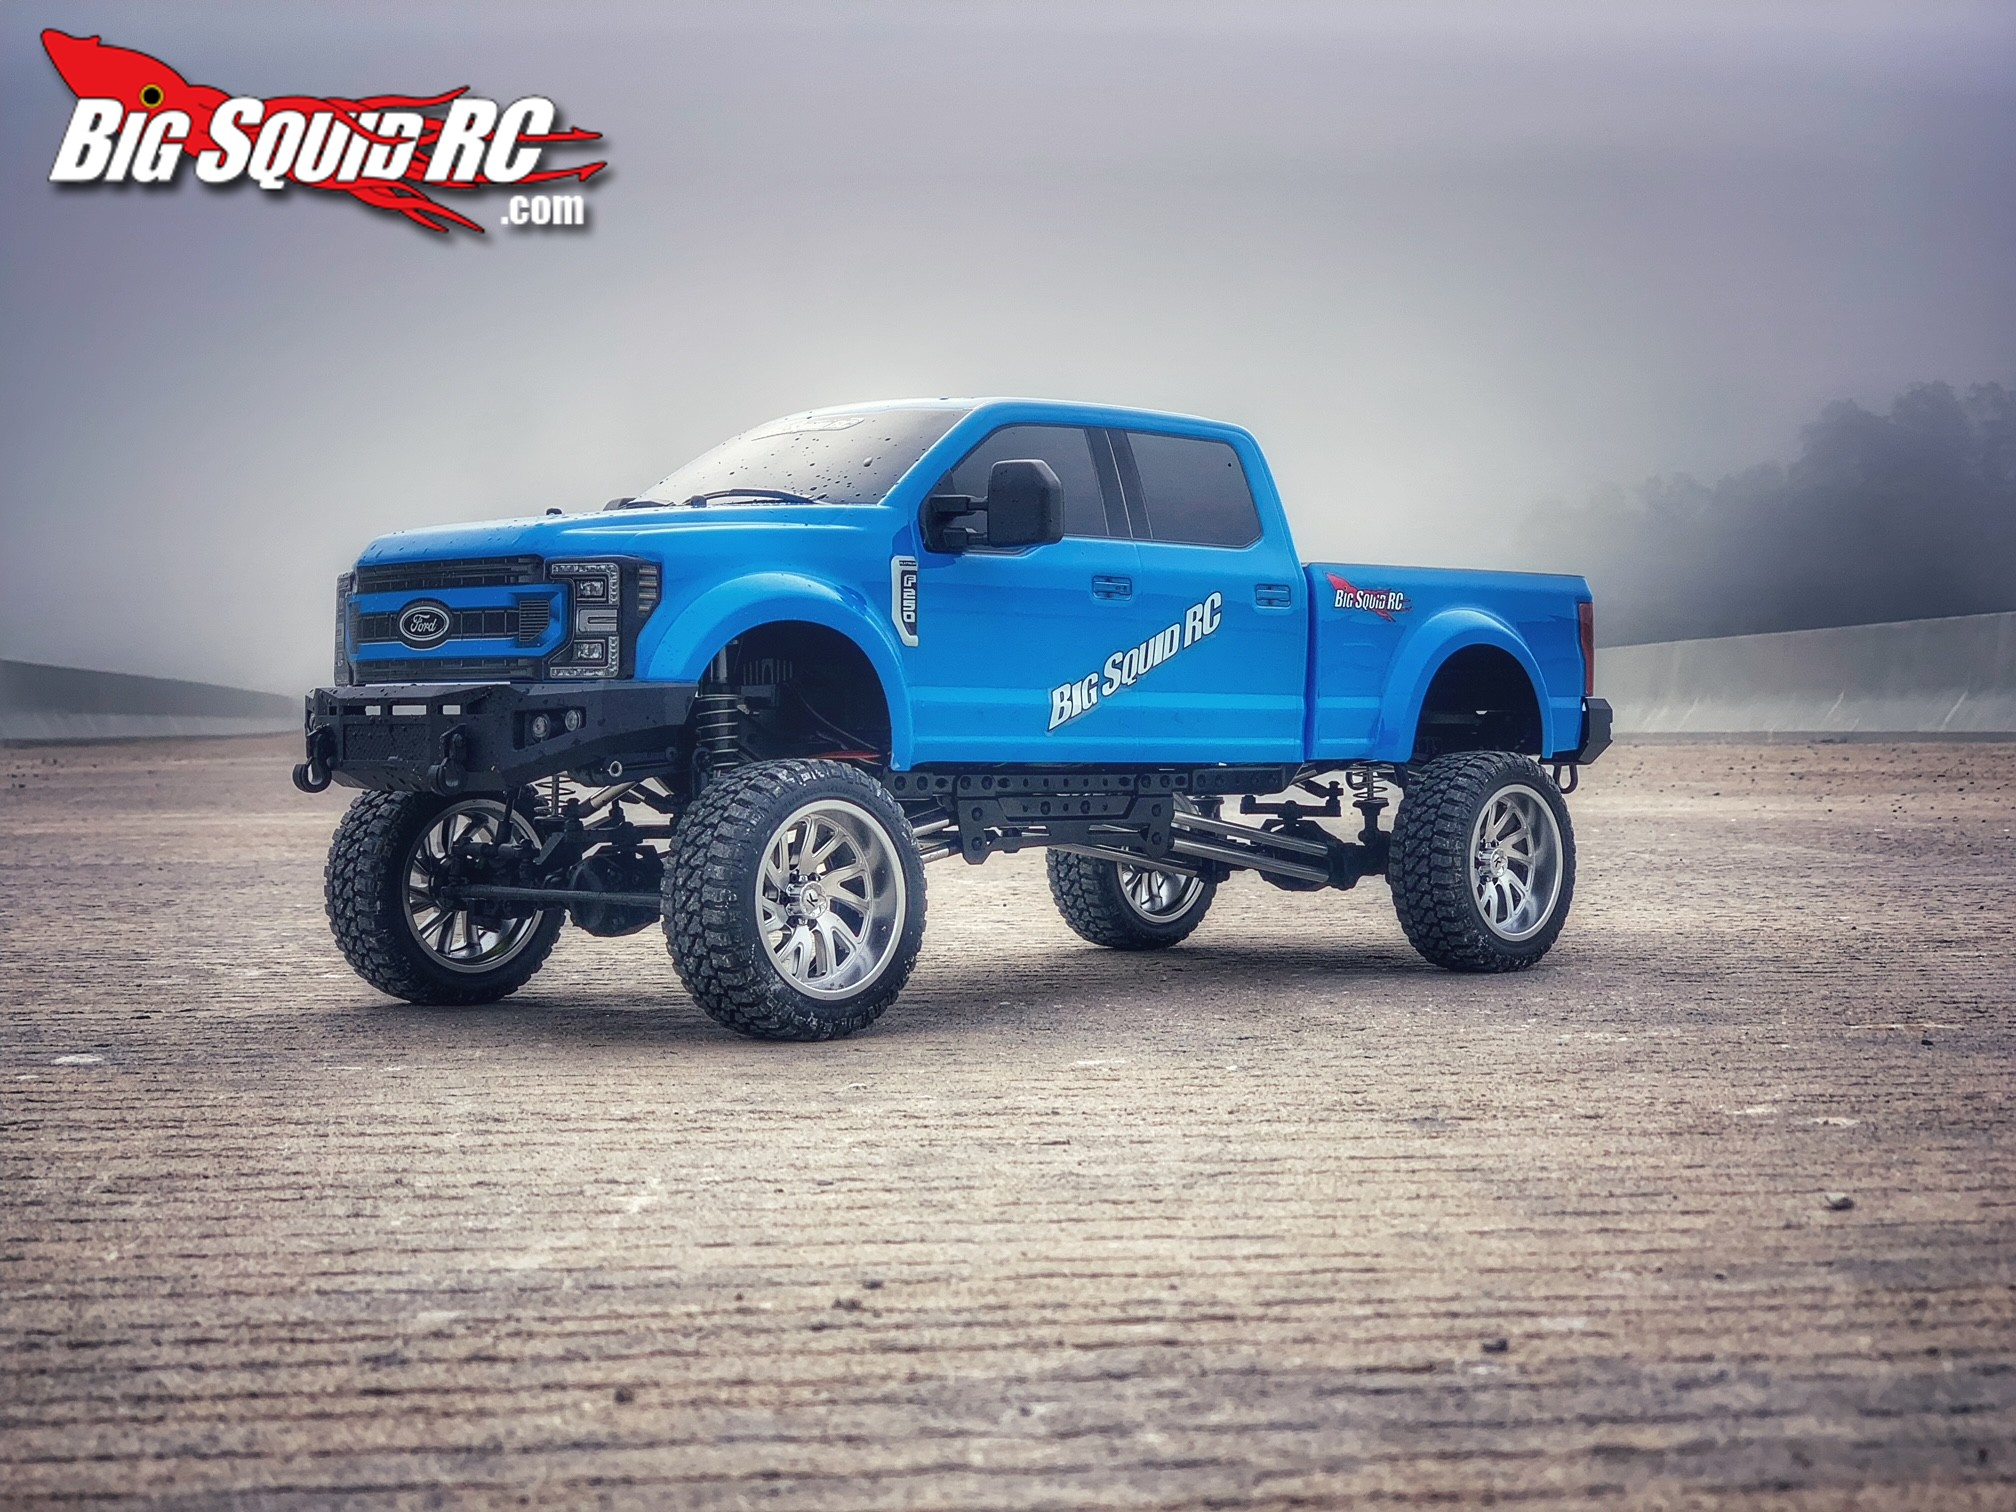 CEN RACING F-250 SD 1/10 4wd solid axle Custom lift truck – REVIEW